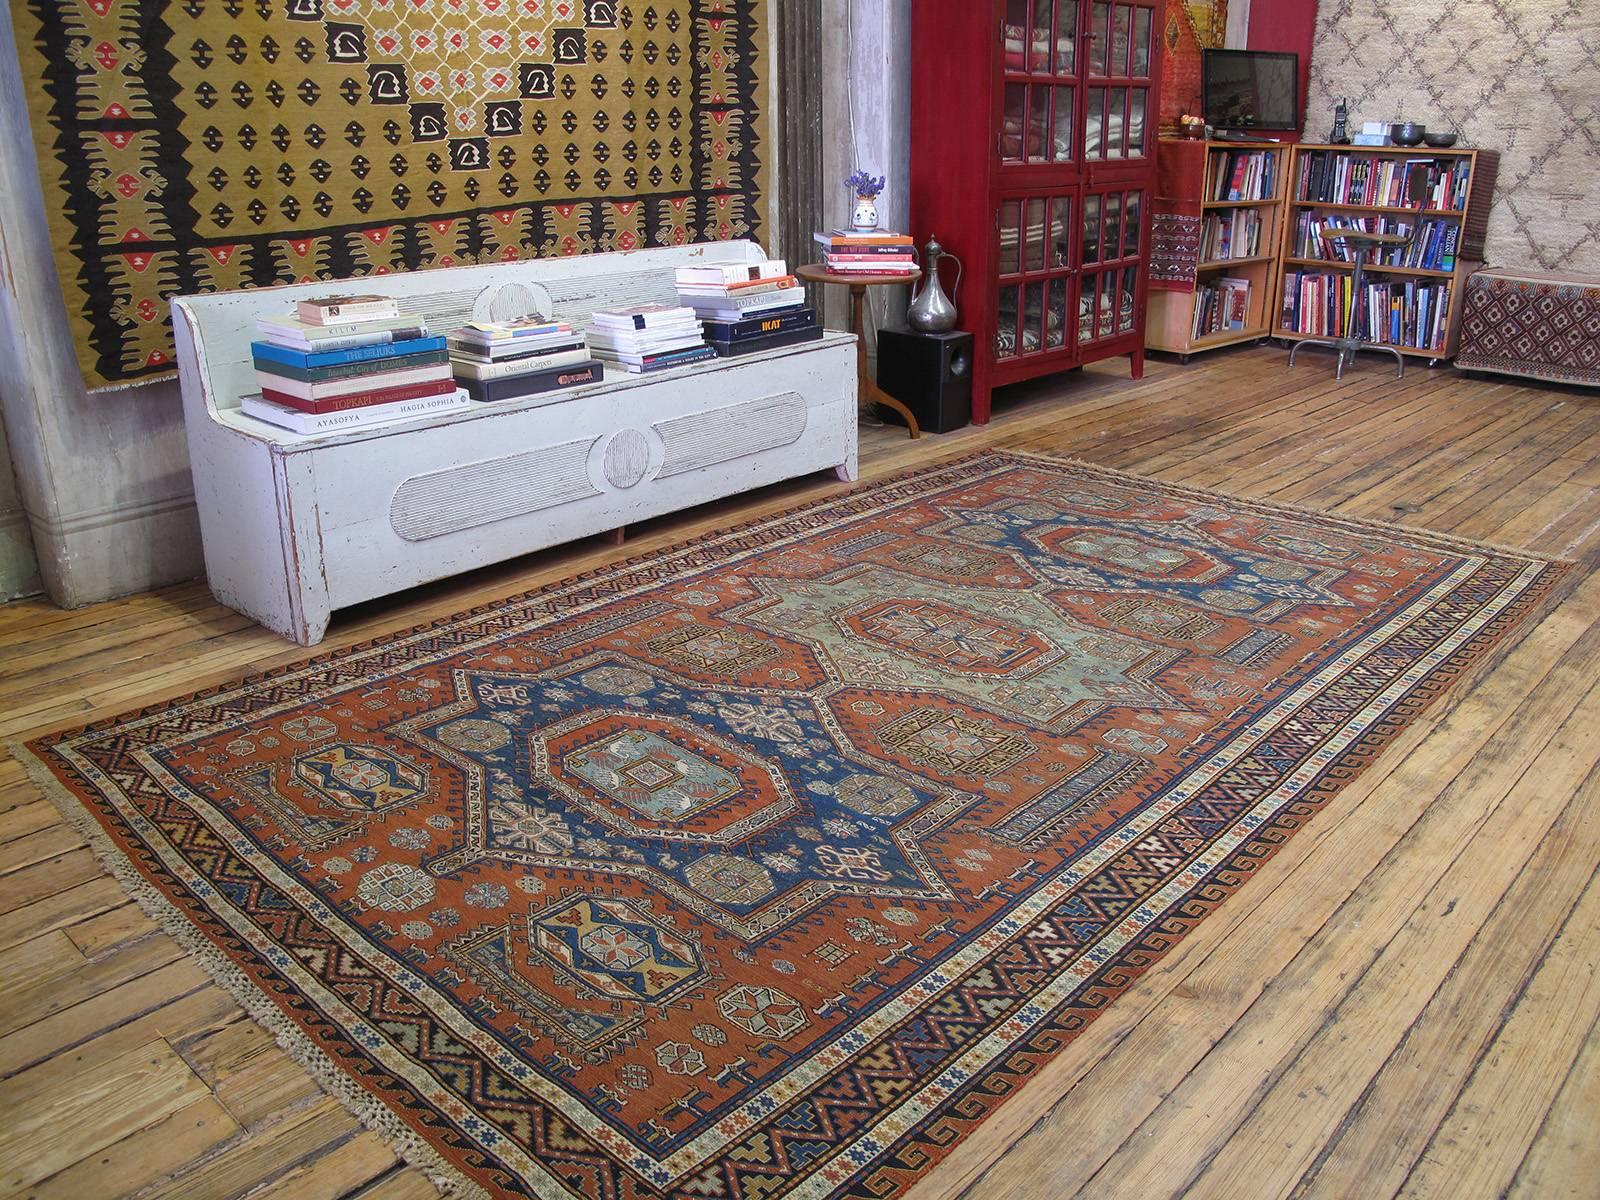 Antique Caucasian Sumak rug. A beautiful antique flat-weave rug from the Caucasus, woven in the intricate 